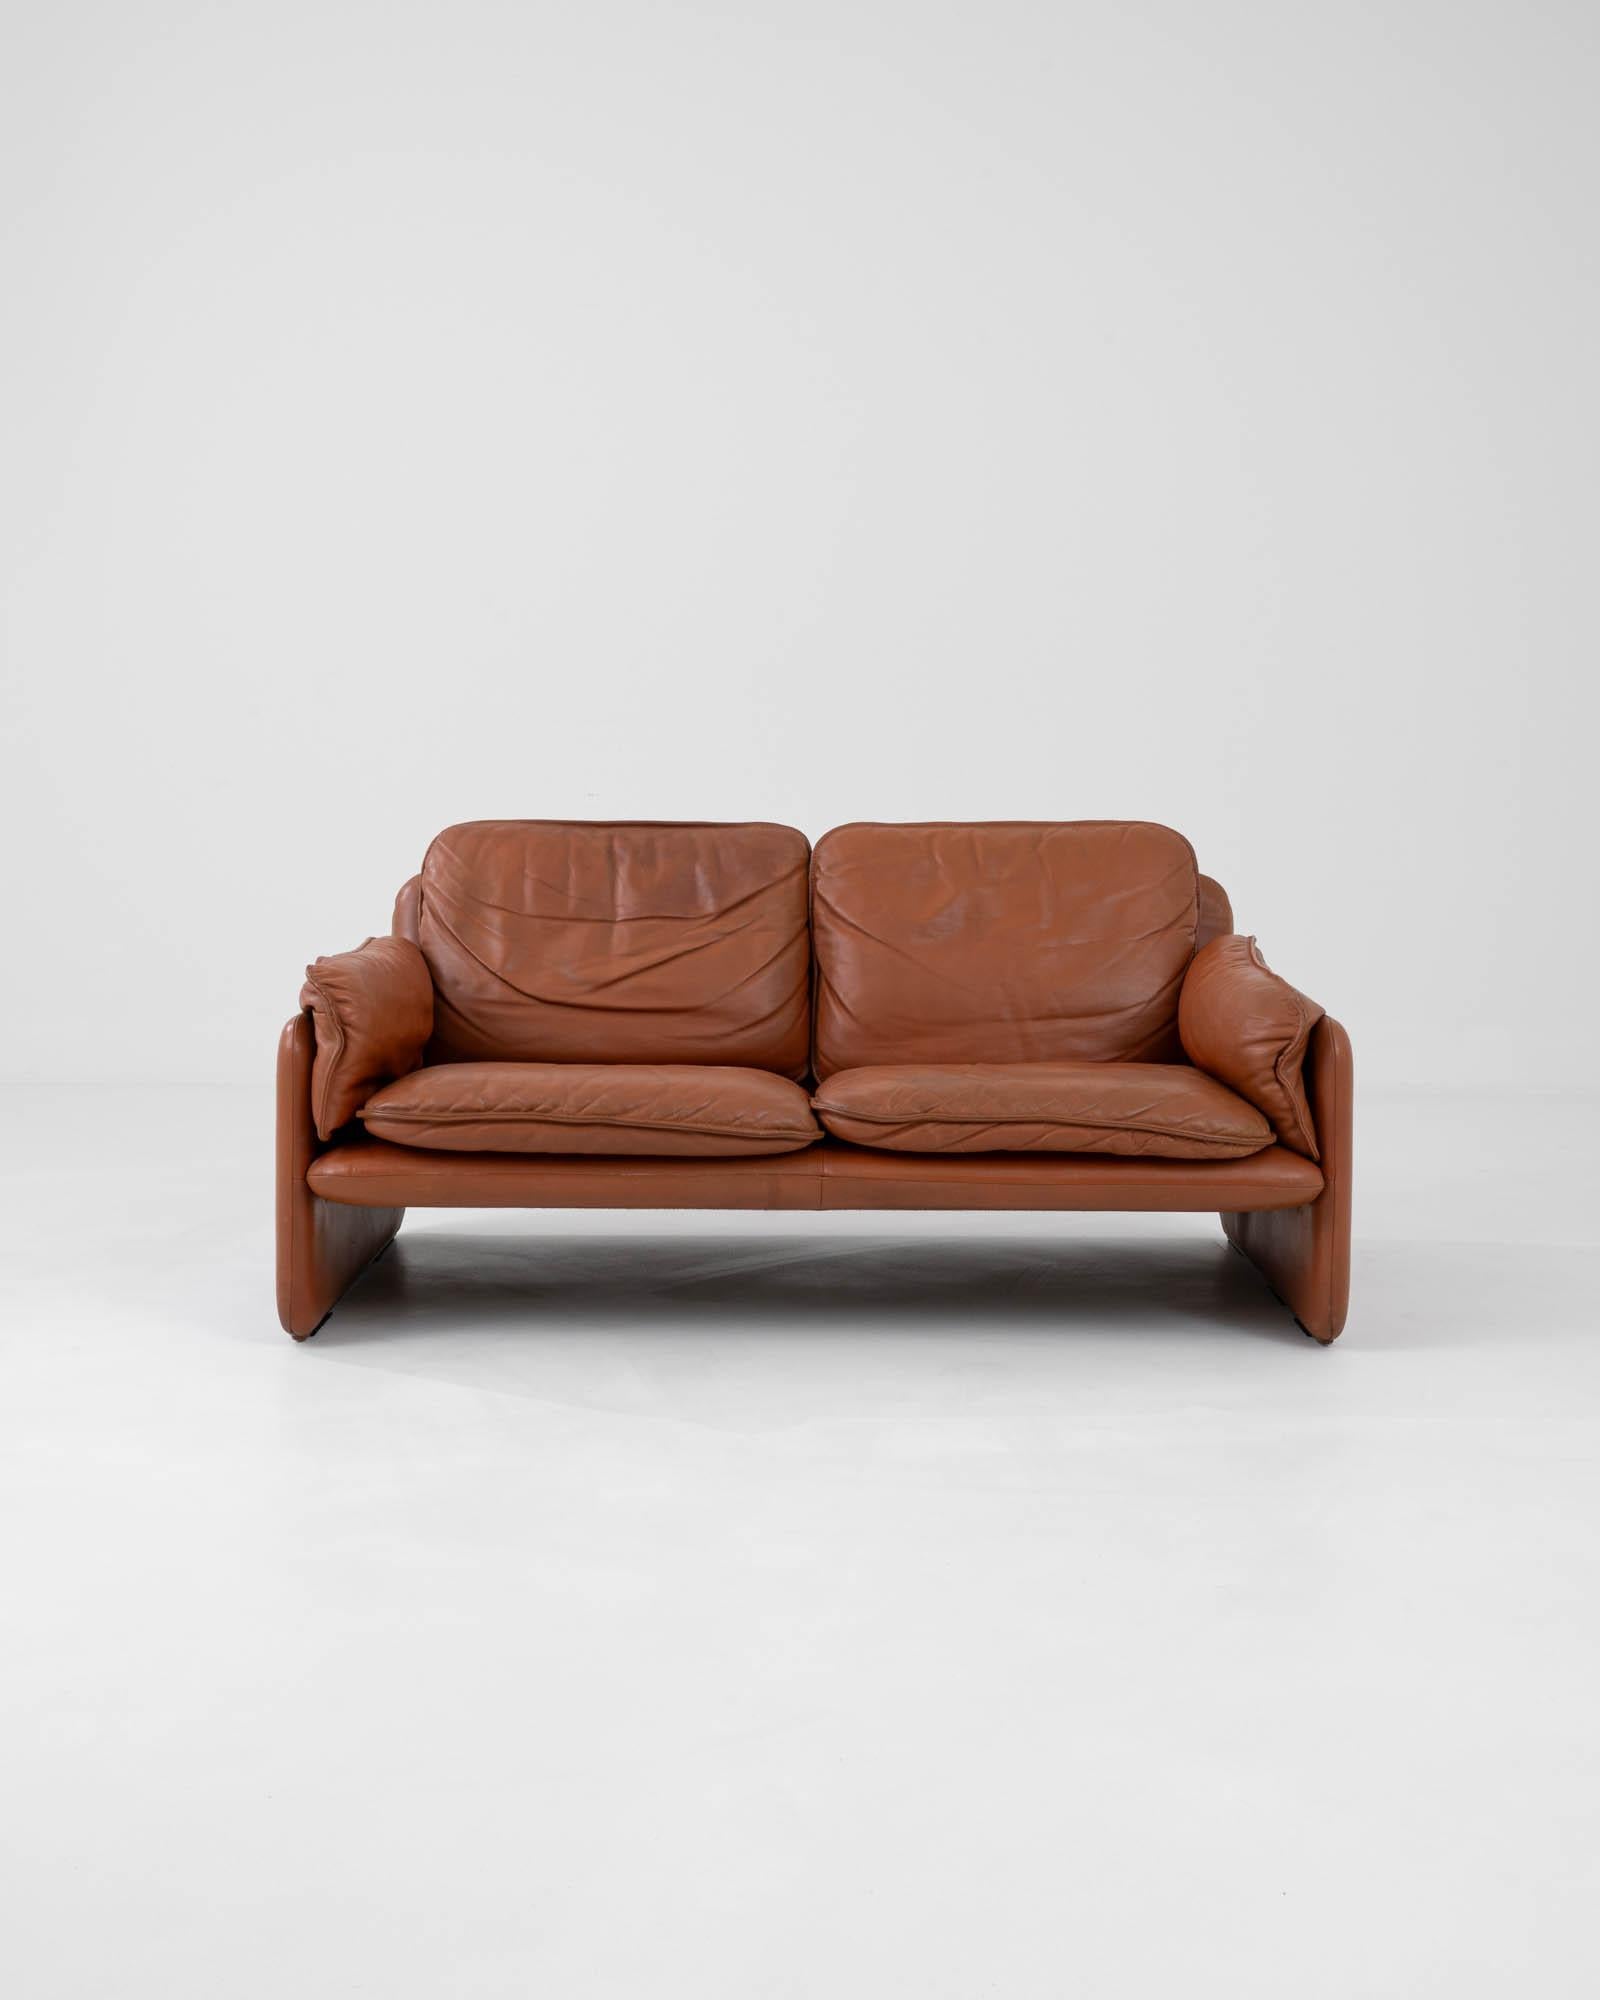 Hand-made in Switzerland by renowned furniture manufacturers De Sede, this 1970s leather sofa is simultaneously sophisticated and playful. The soft, slouchy folds of the cushions and armrests give a relaxed inflection to the structural silhouette,